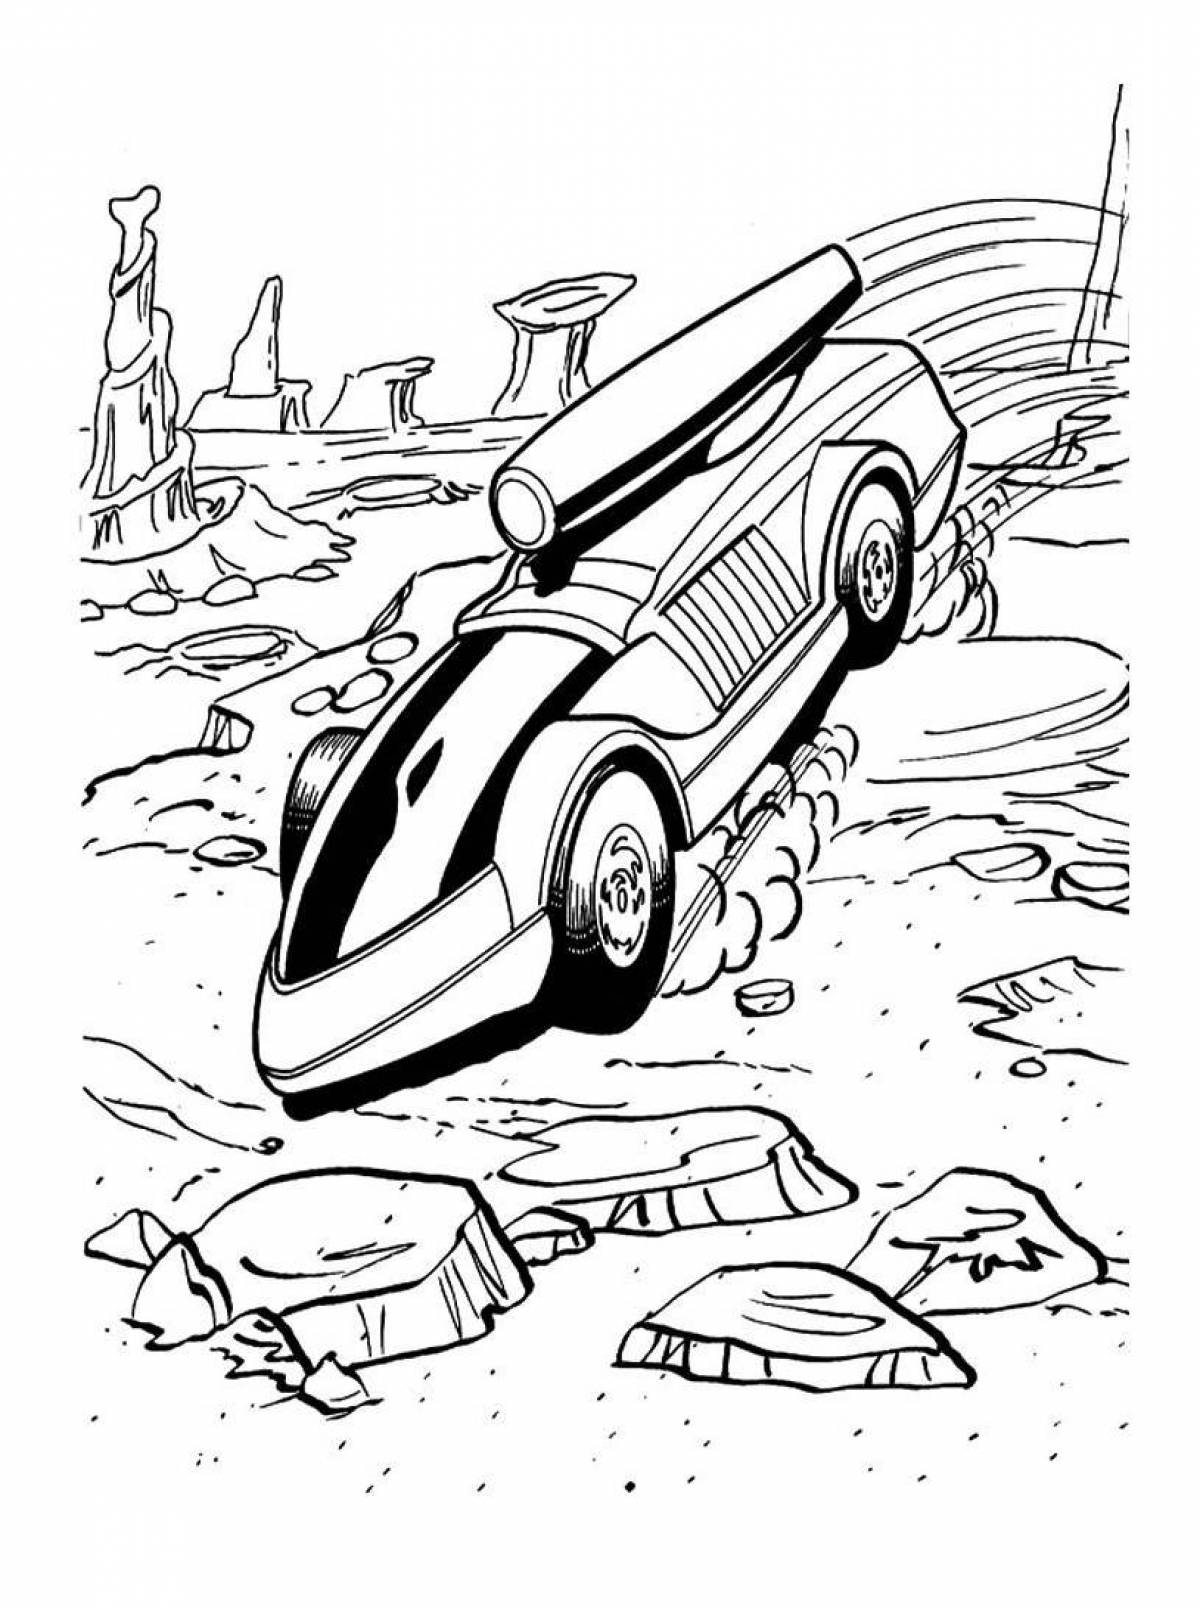 Playful hot wheels coloring book for kids